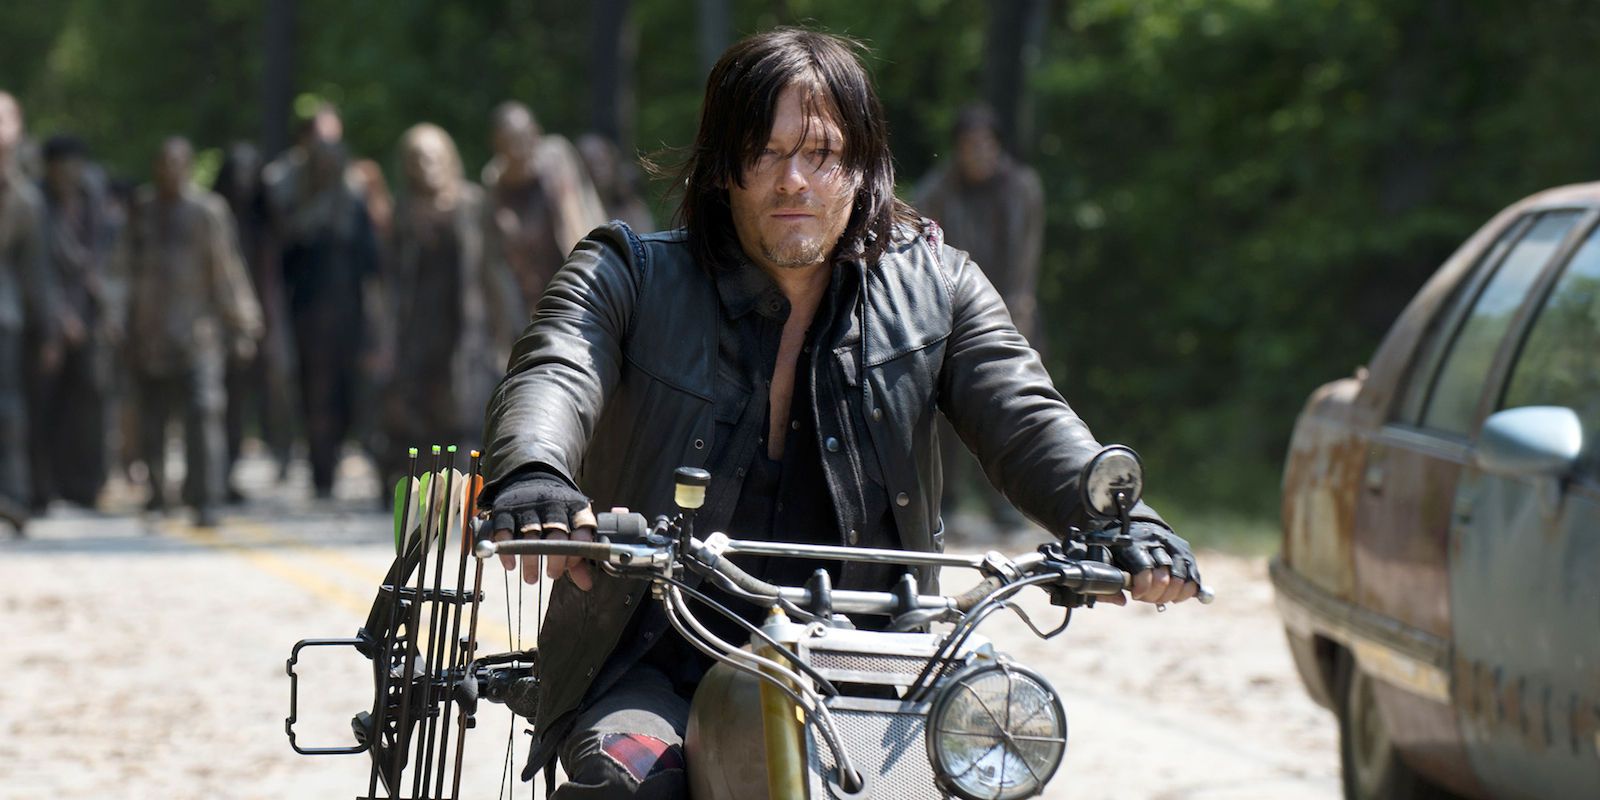 Daryl on a motorcycle in The Walking Dead